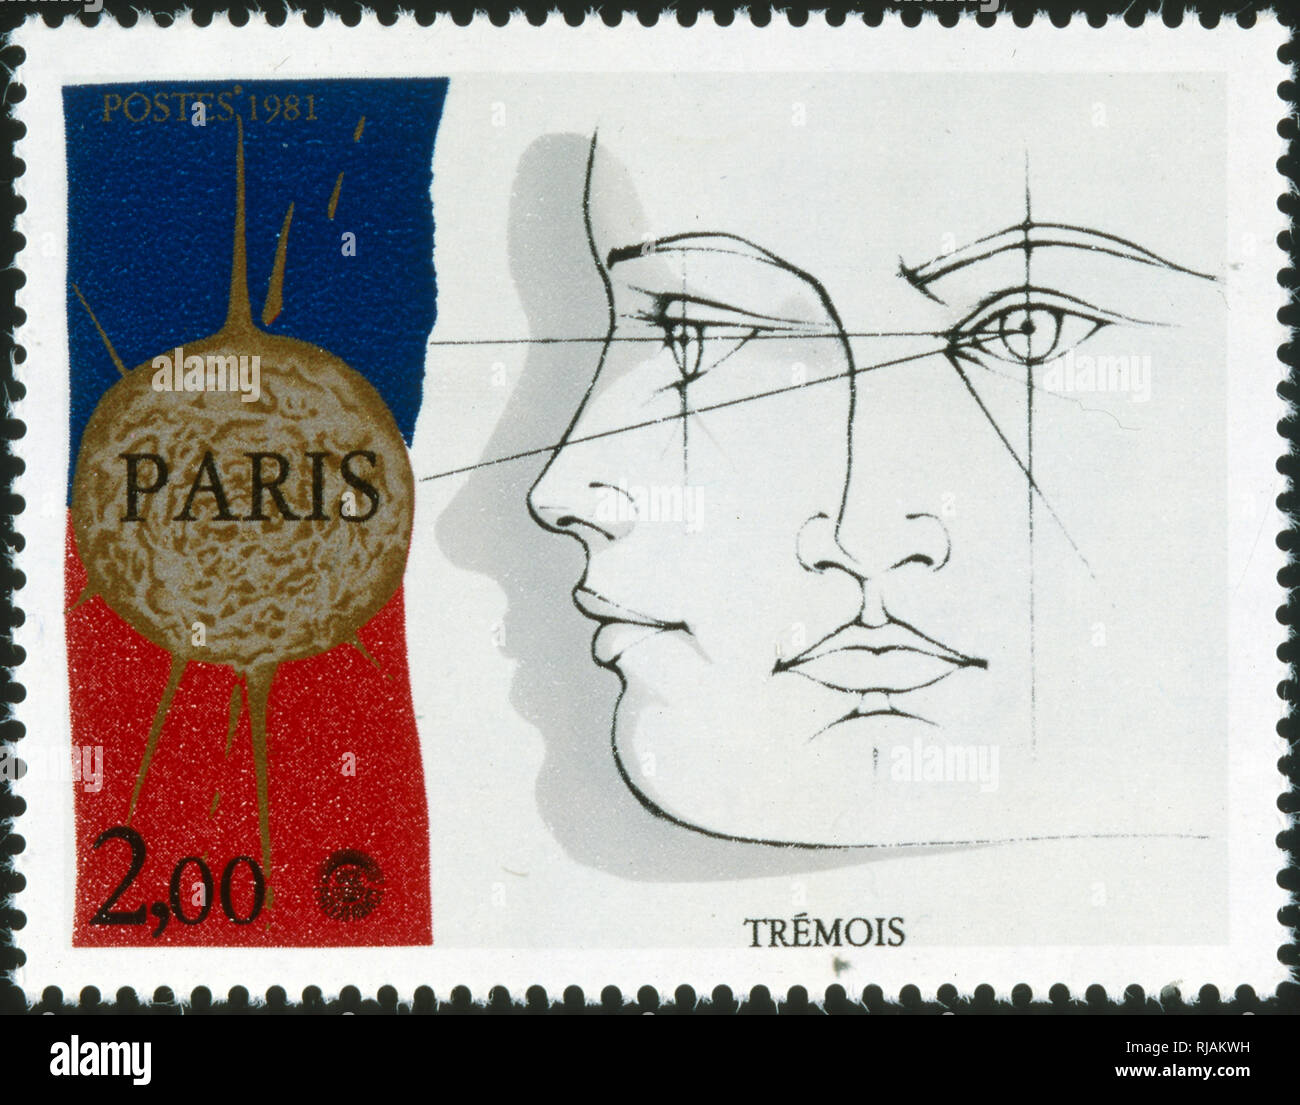 French postage stamp commemorating Pierre-Yves Tremois (born 8 January 1921 in Paris), a French visual artist and sculptor. He is known for evocative works drawing in equal proportions on surrealism and science illustration Stock Photo